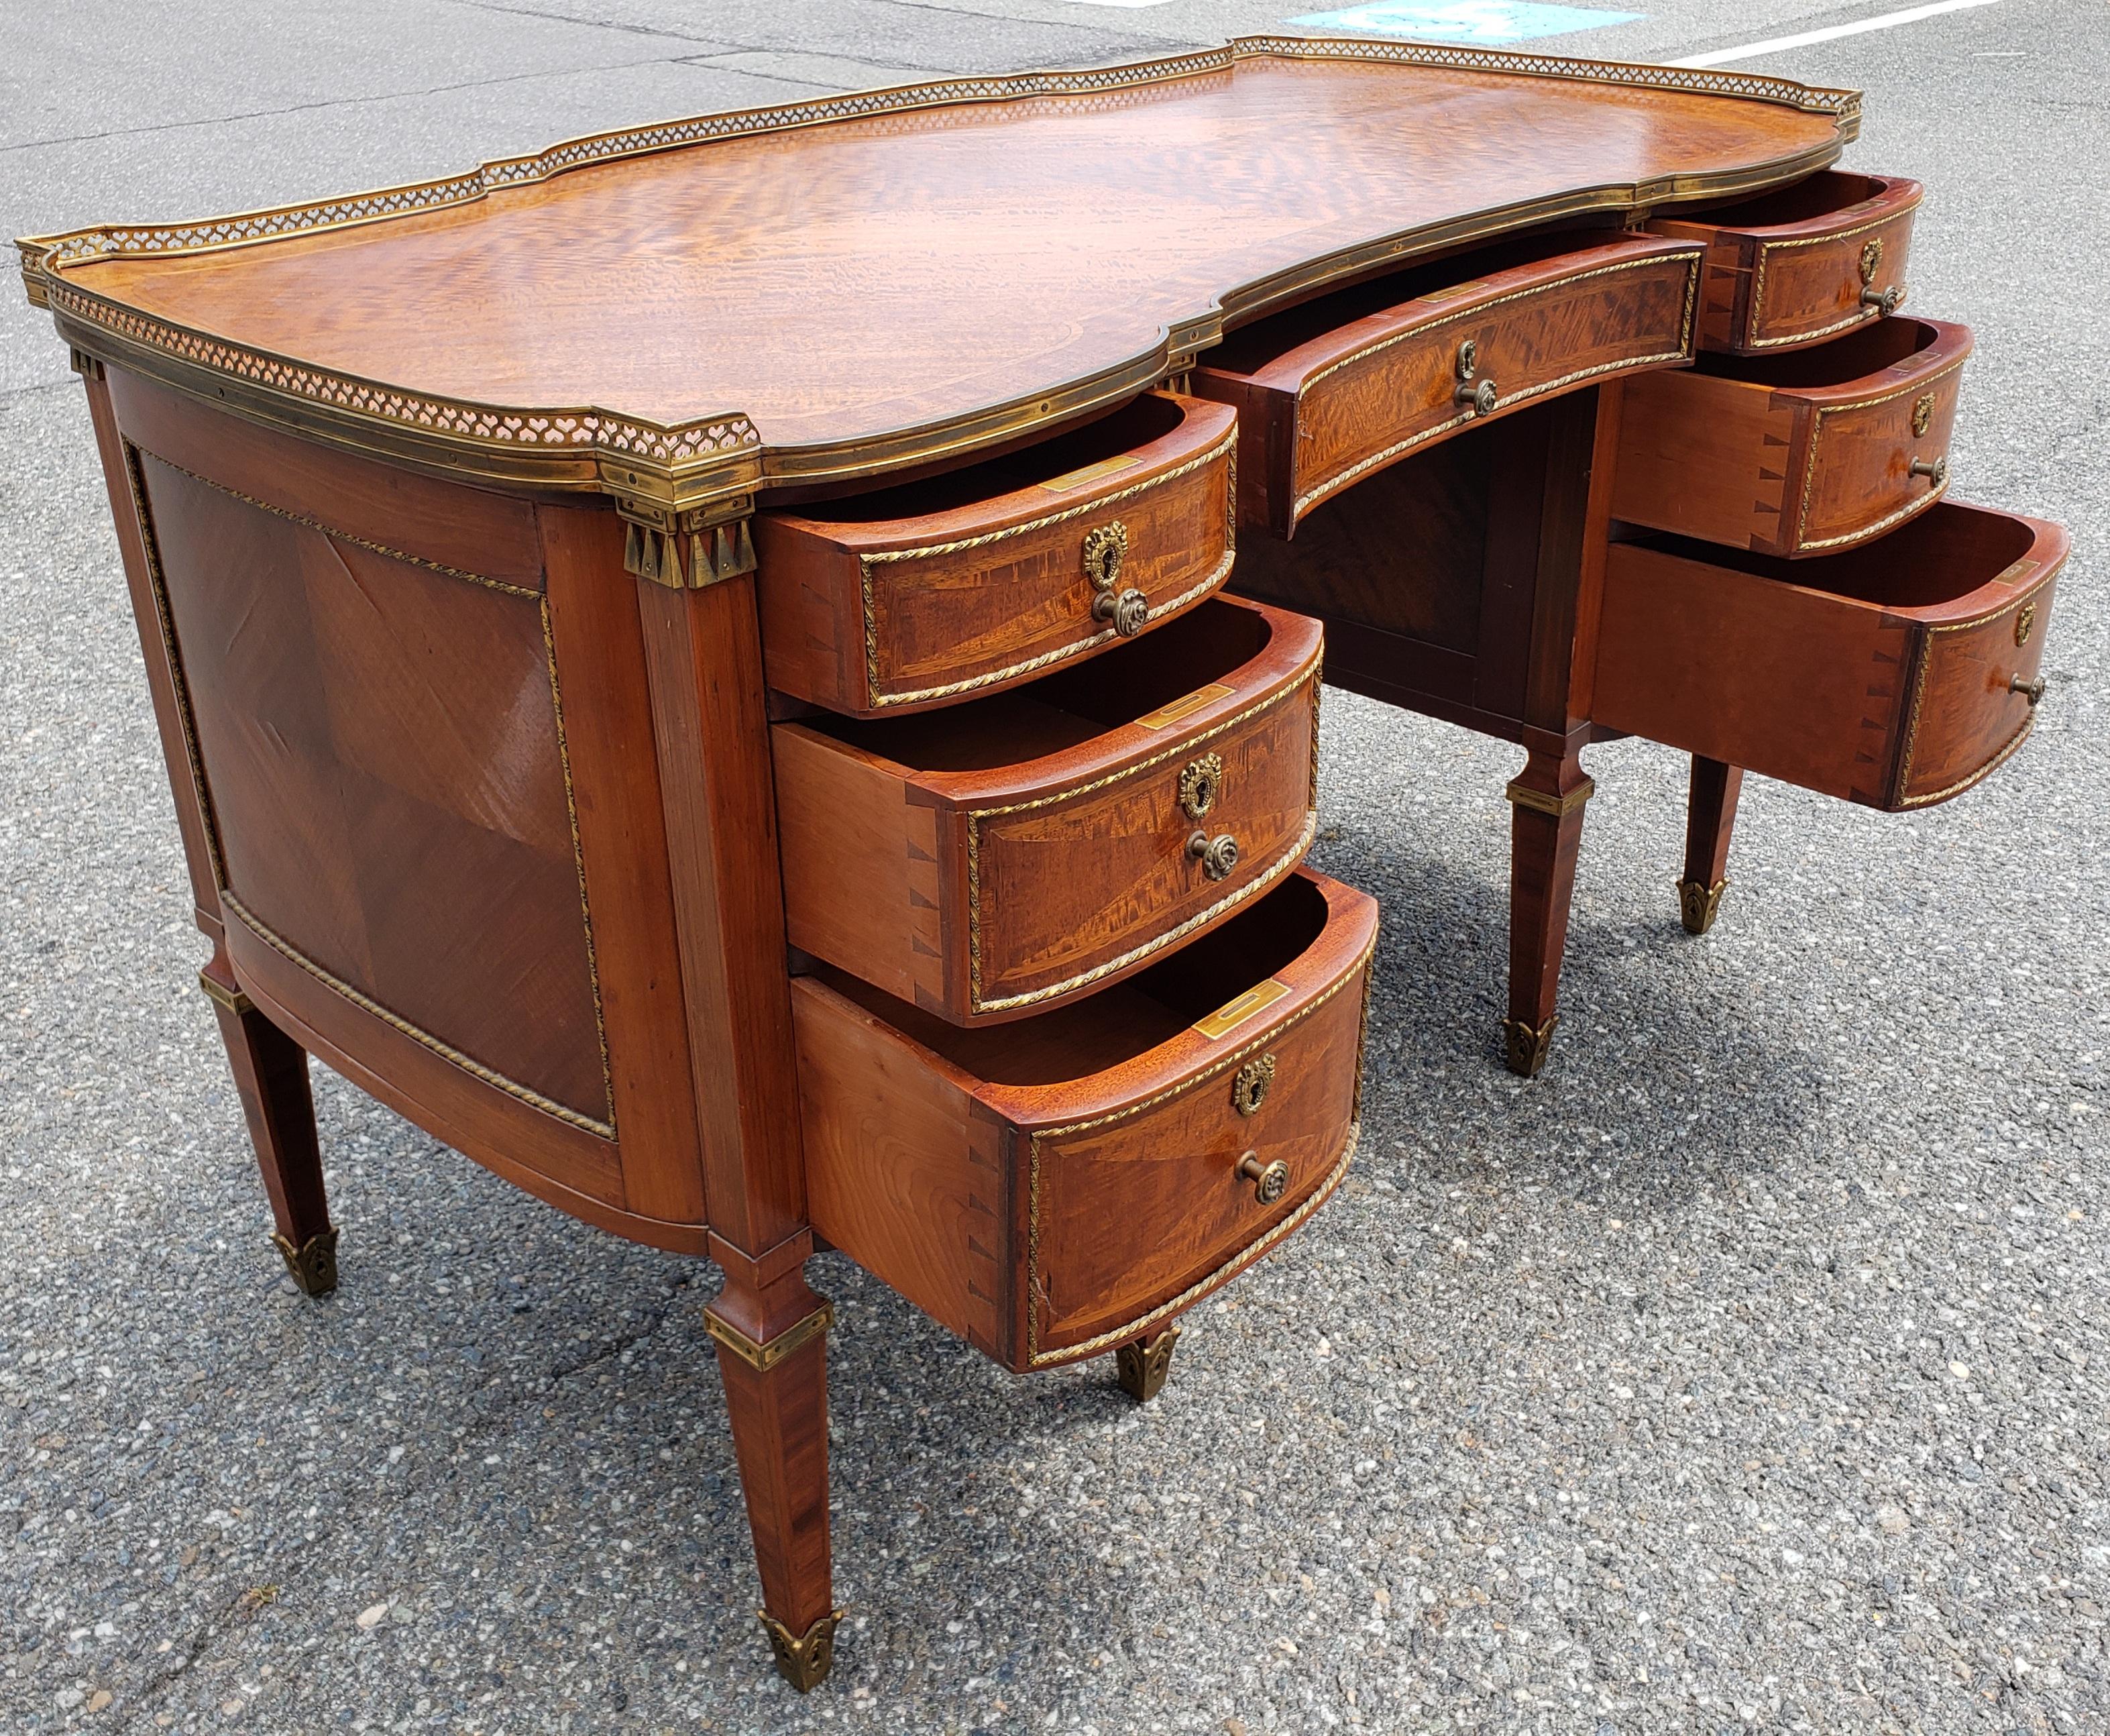 Louis XVI Style Ormolu Mounted Galleried Mahogany Burl and Marquetry Desk  In Good Condition For Sale In Germantown, MD